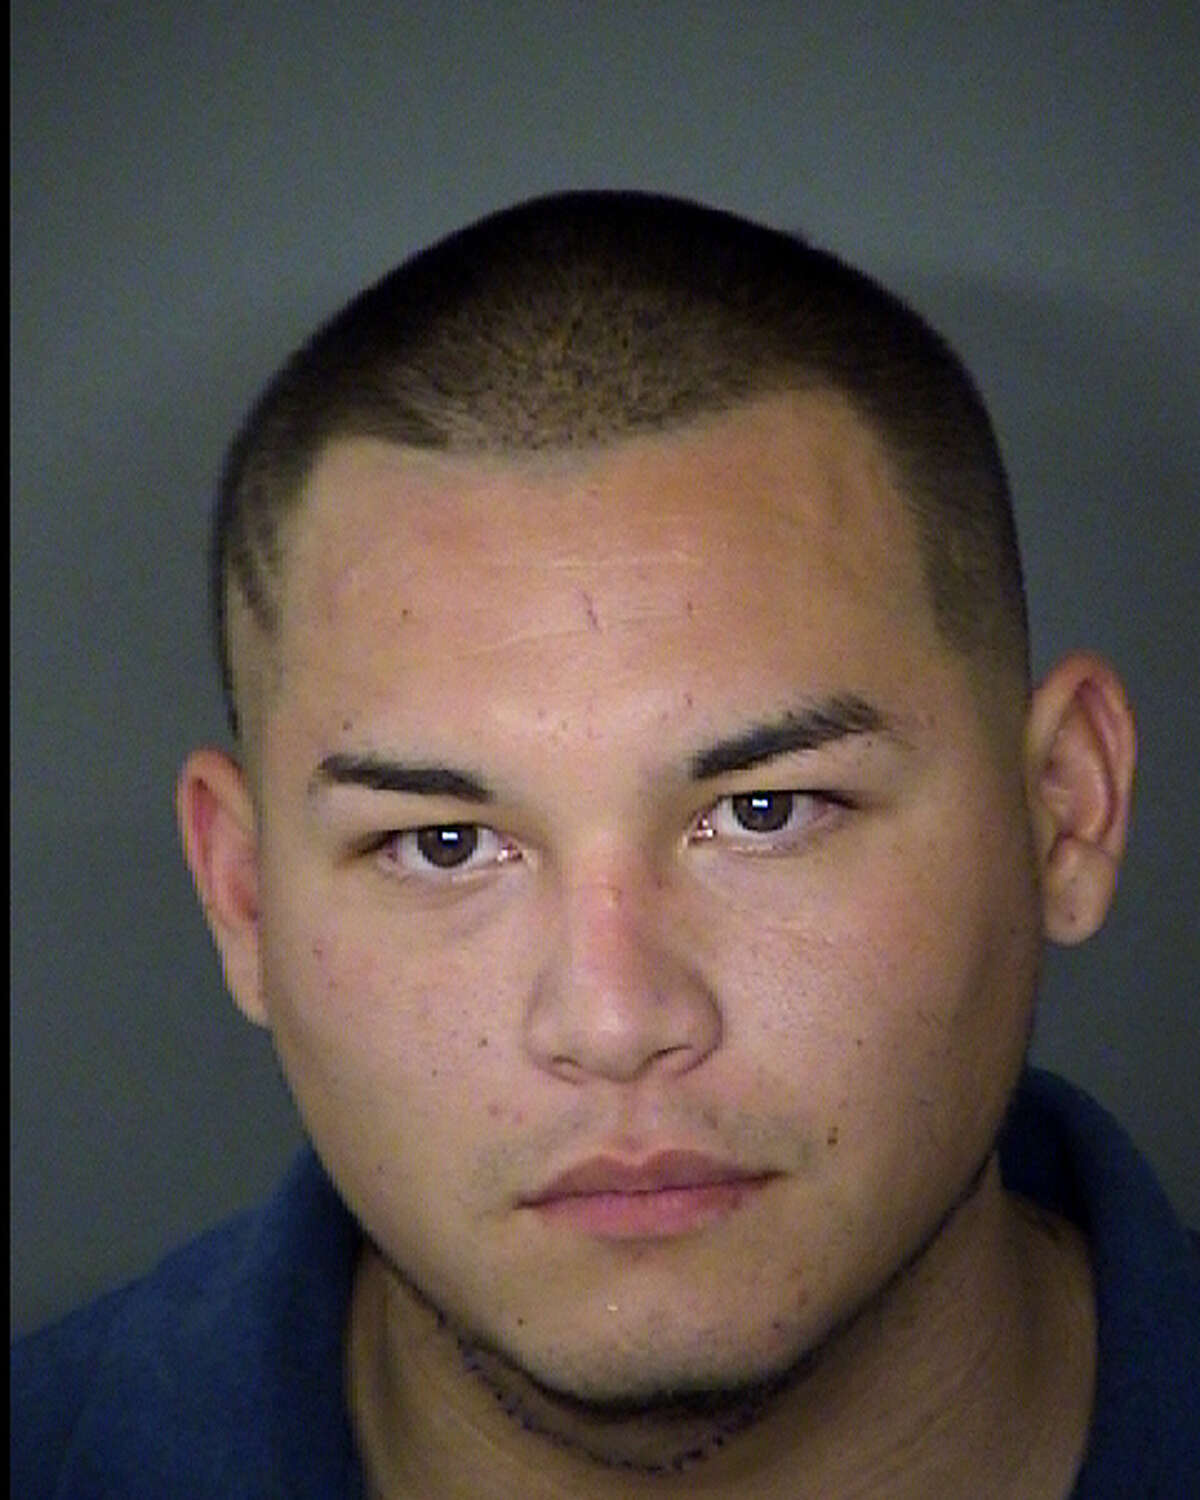 SAPD said Frank Hernandez, 24, is wanted for credit card abuse/elderly and fraudulent use of identifying information/elderly and is a person of interest in the death of Paula Boyd who was found deceased in her apartment on Oct. 21, 2015.